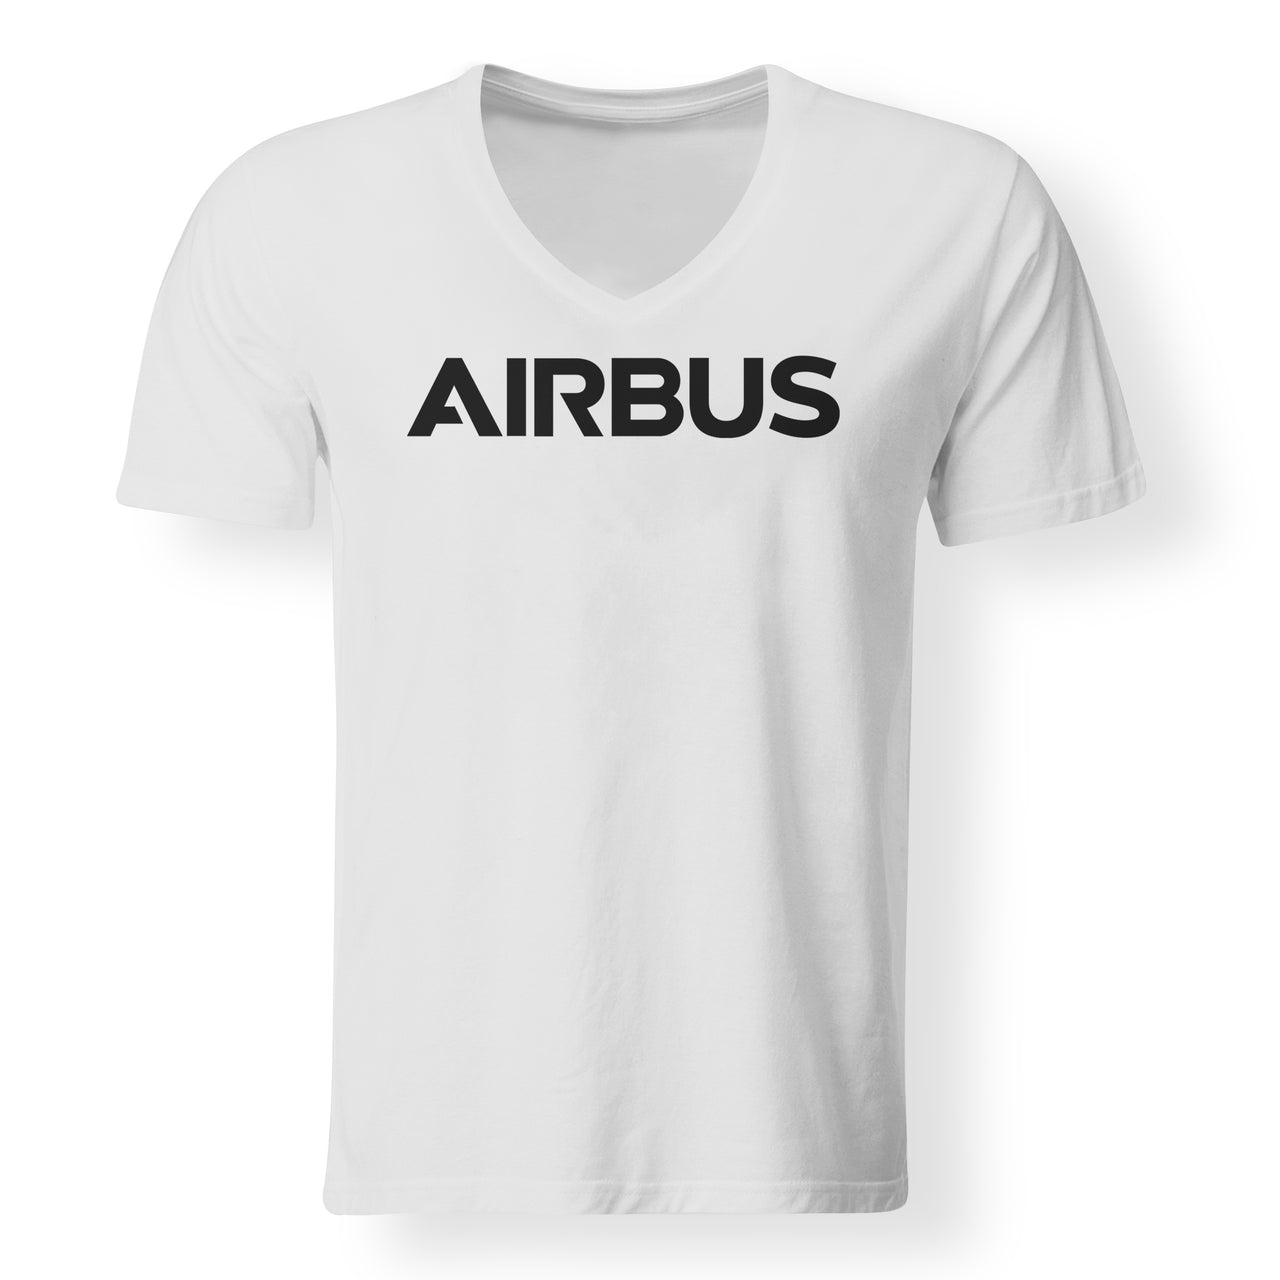 Airbus & Text Designed V-Neck T-Shirts